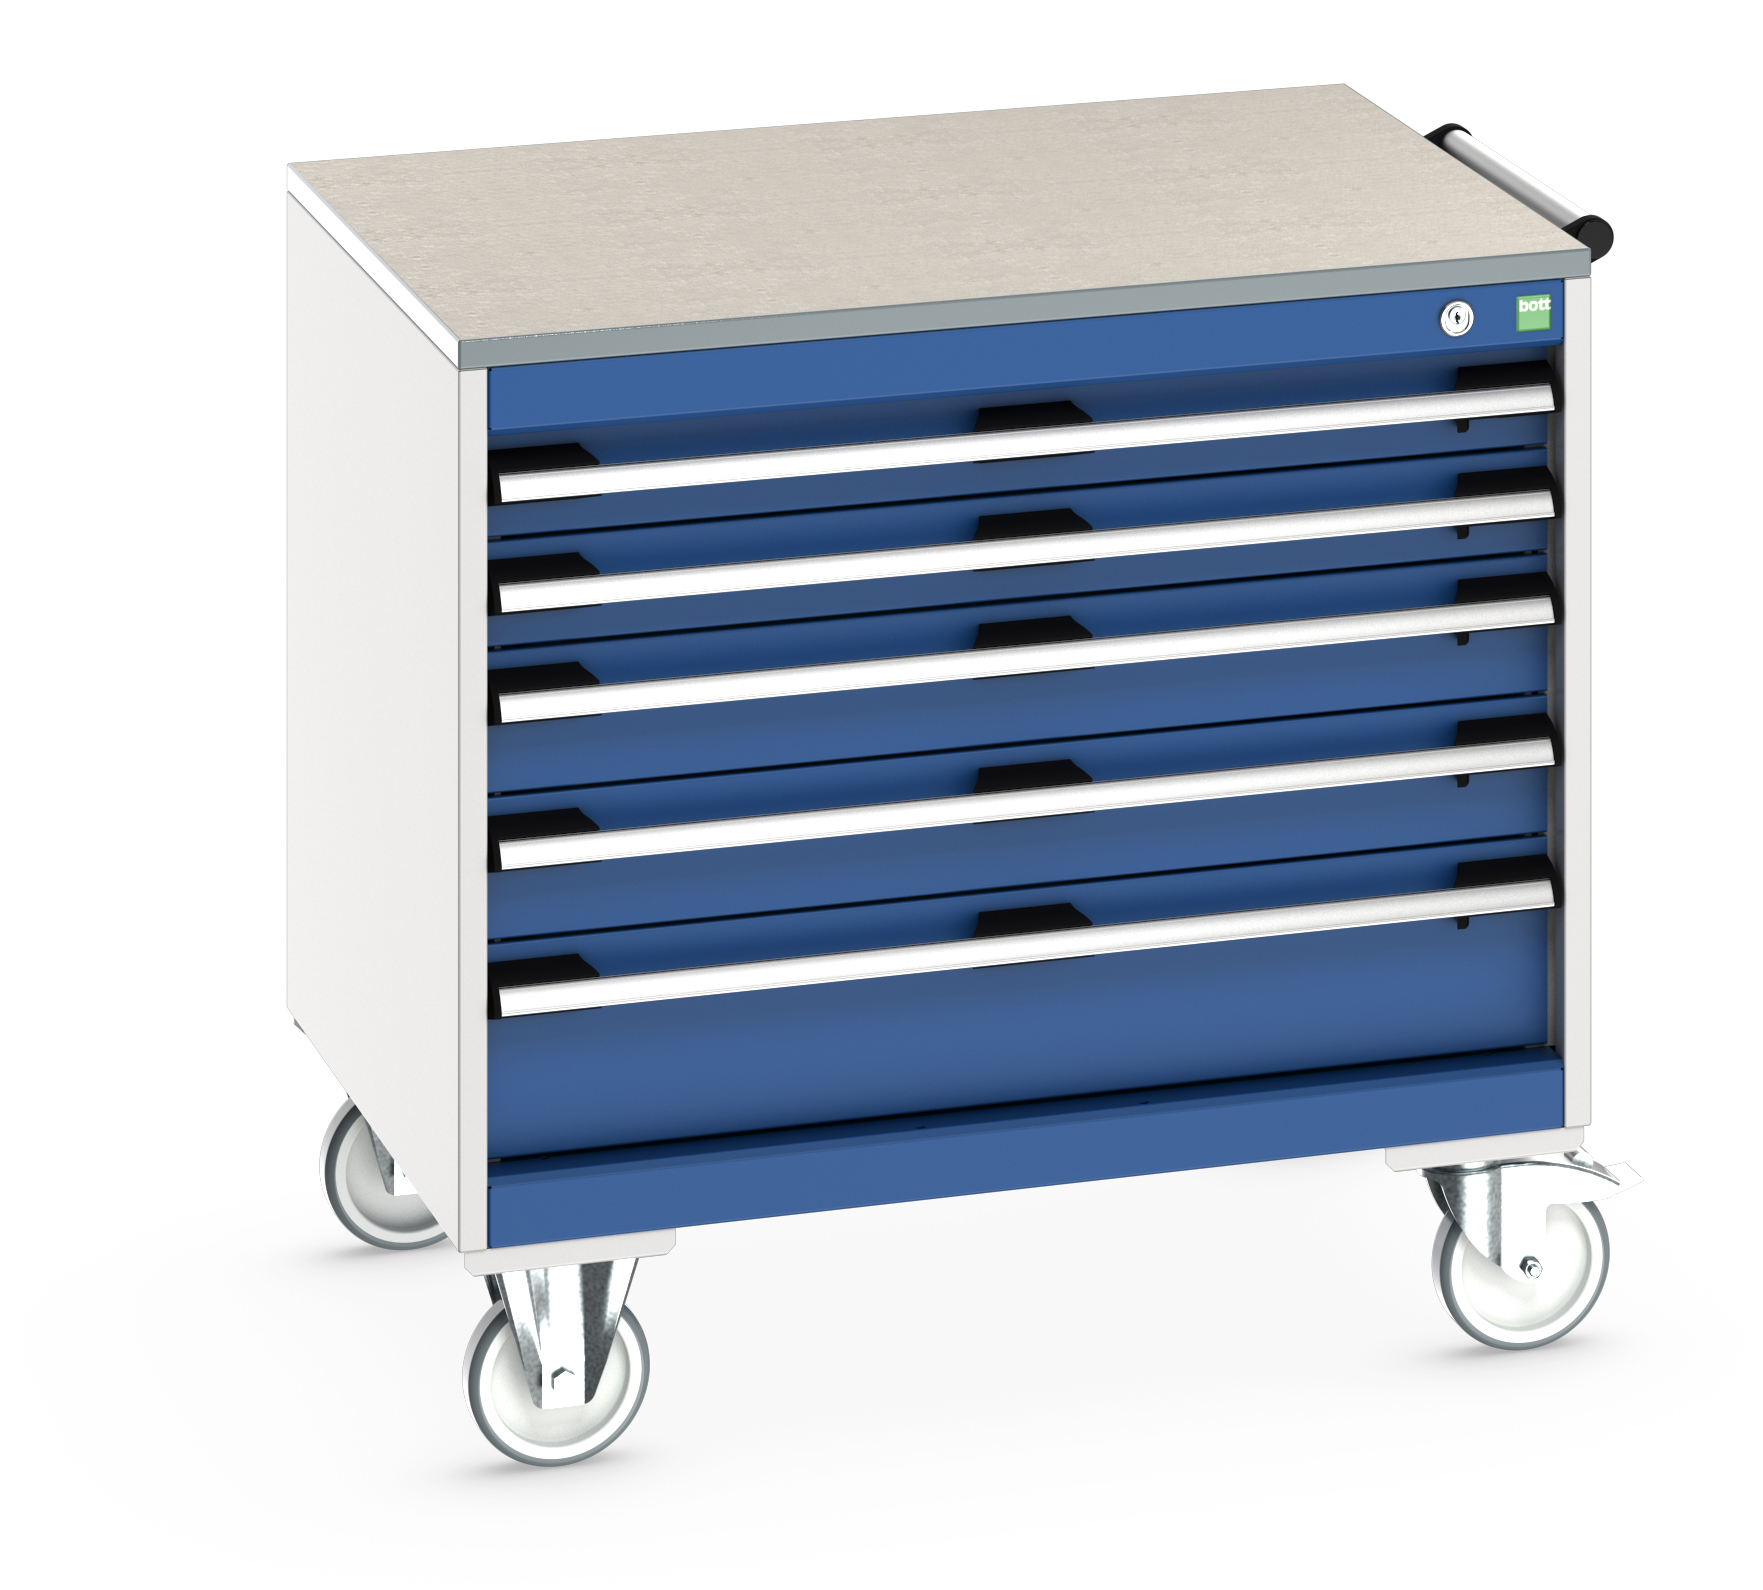 Bott Cubio Mobile Drawer Cabinet With 5 Drawers & Lino Worktop - 40402154.11V